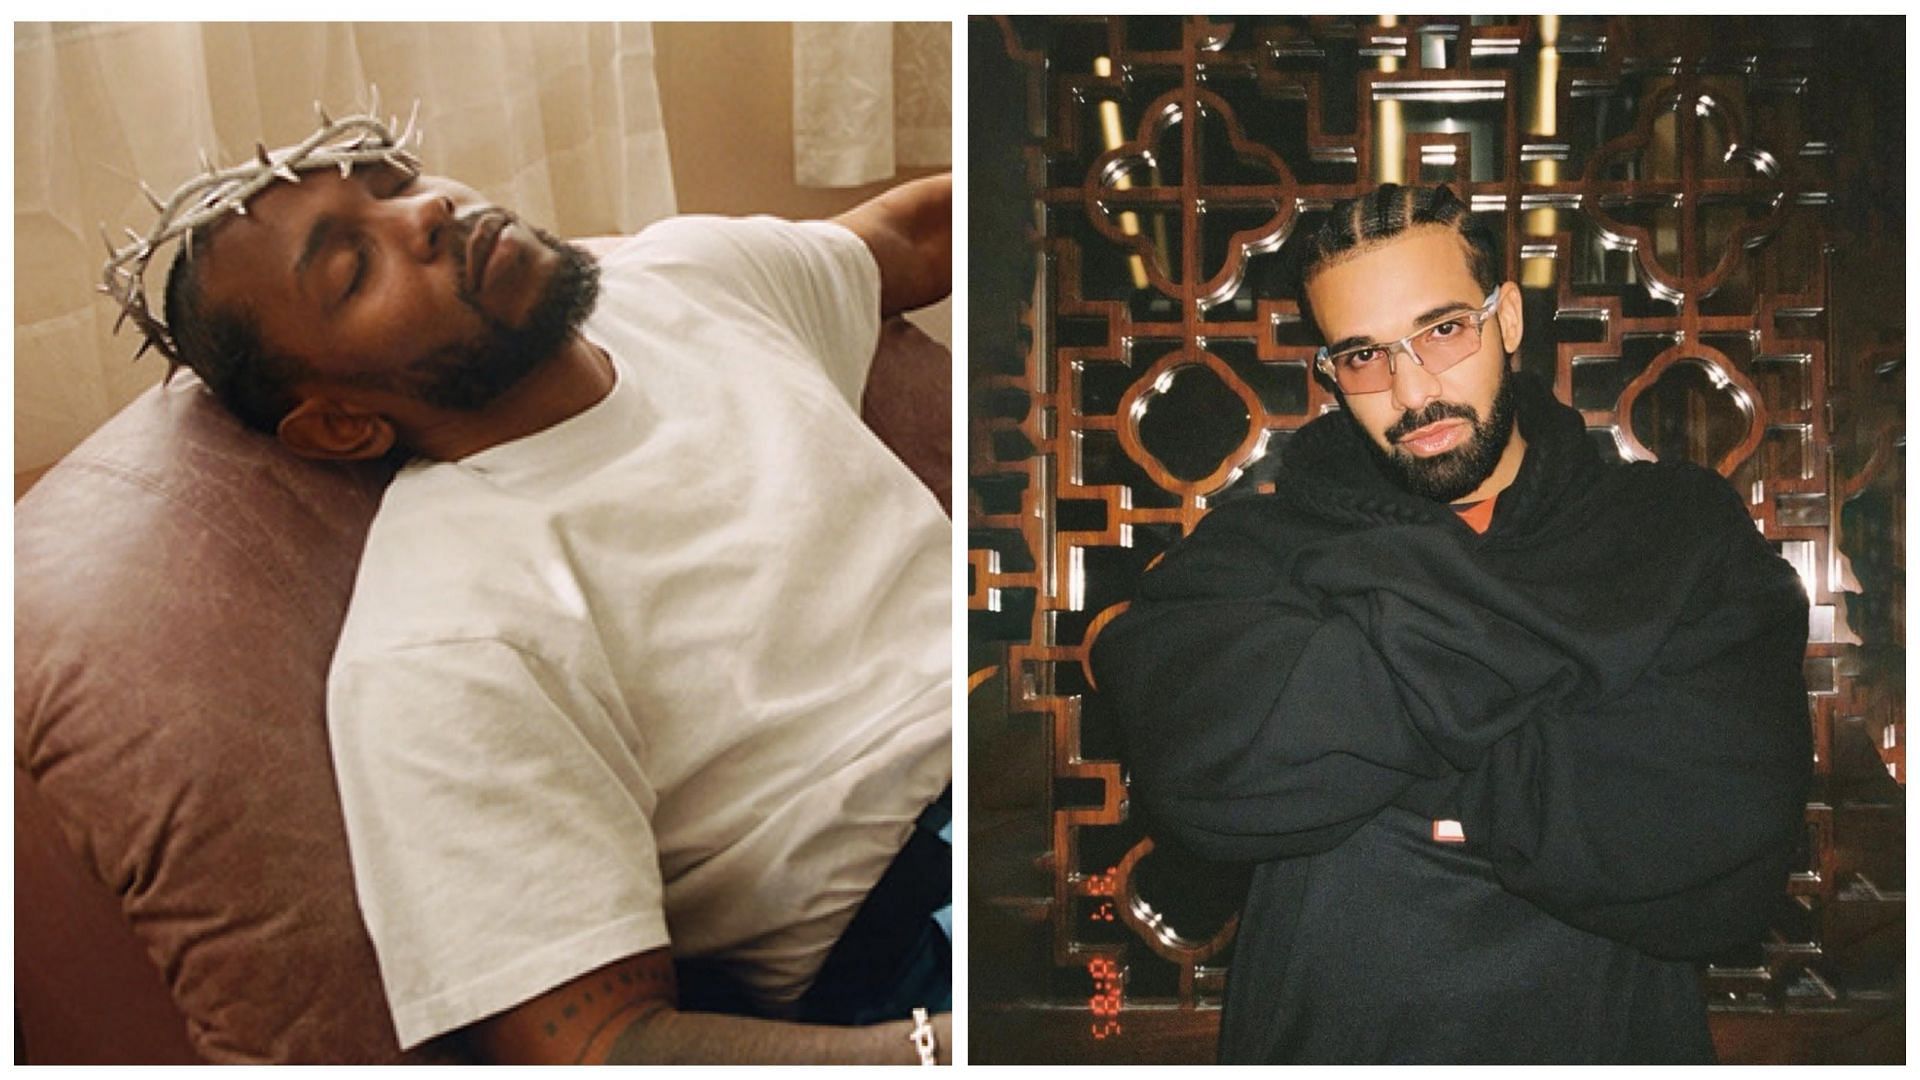 Kendrick Lamar and the Canadian rapper&#039;s beef caught the entire anime and manga community&#039;s attention (Image via@Kendrick Lamar/Facebook and @champagnepapi/Instagram)